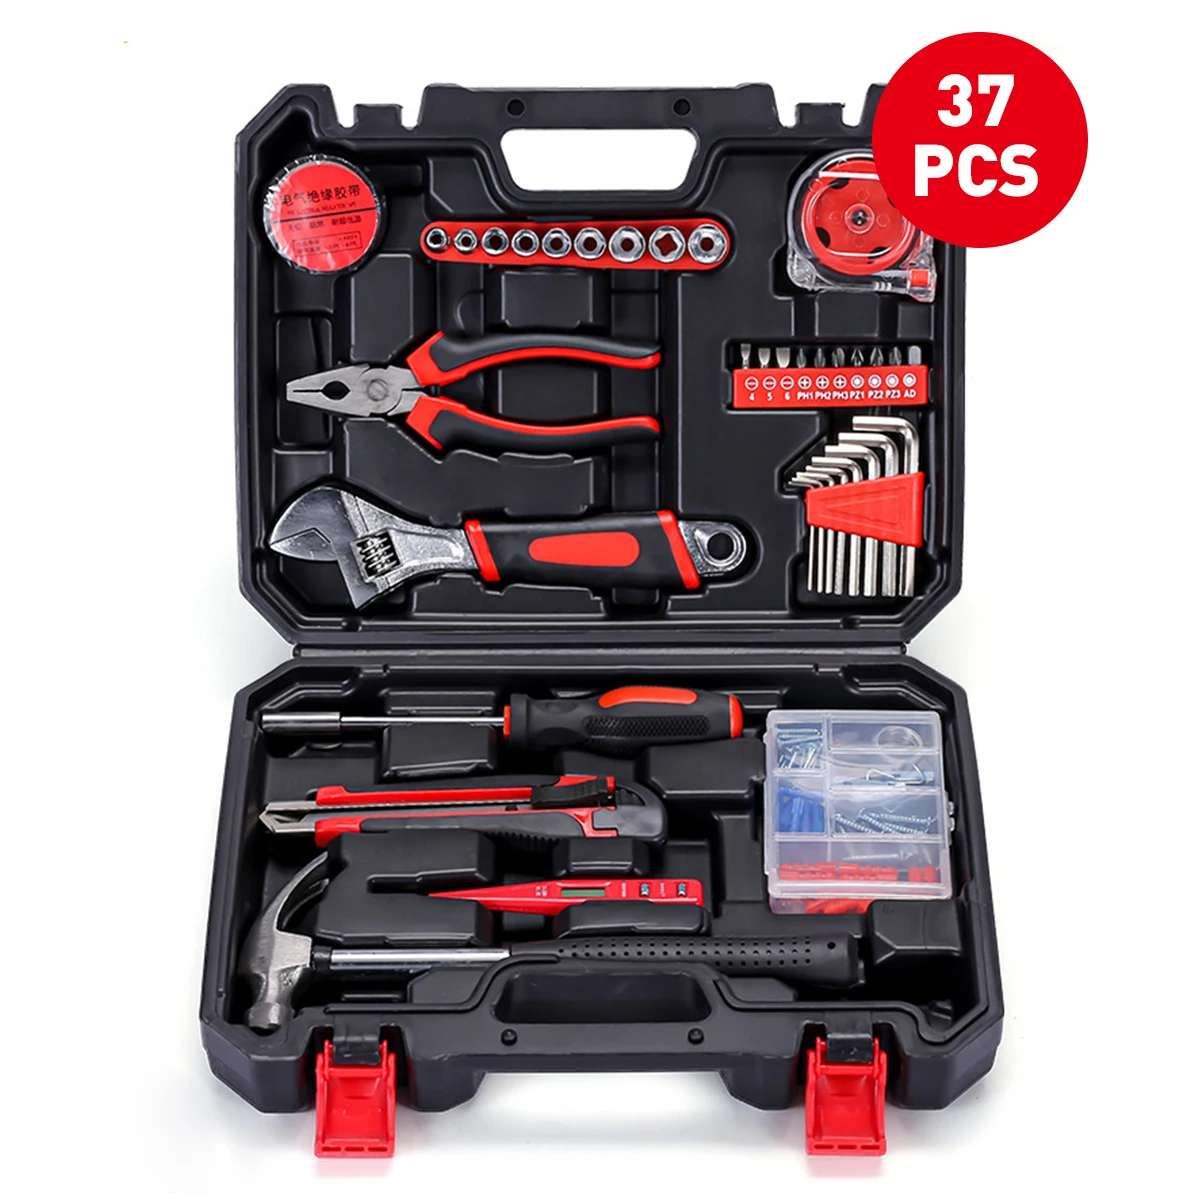 Wholesale 37Pcs In Box Package Manual Professional Household Repair Tool Set Multi-function Combination Hand Tools Kit Home Use